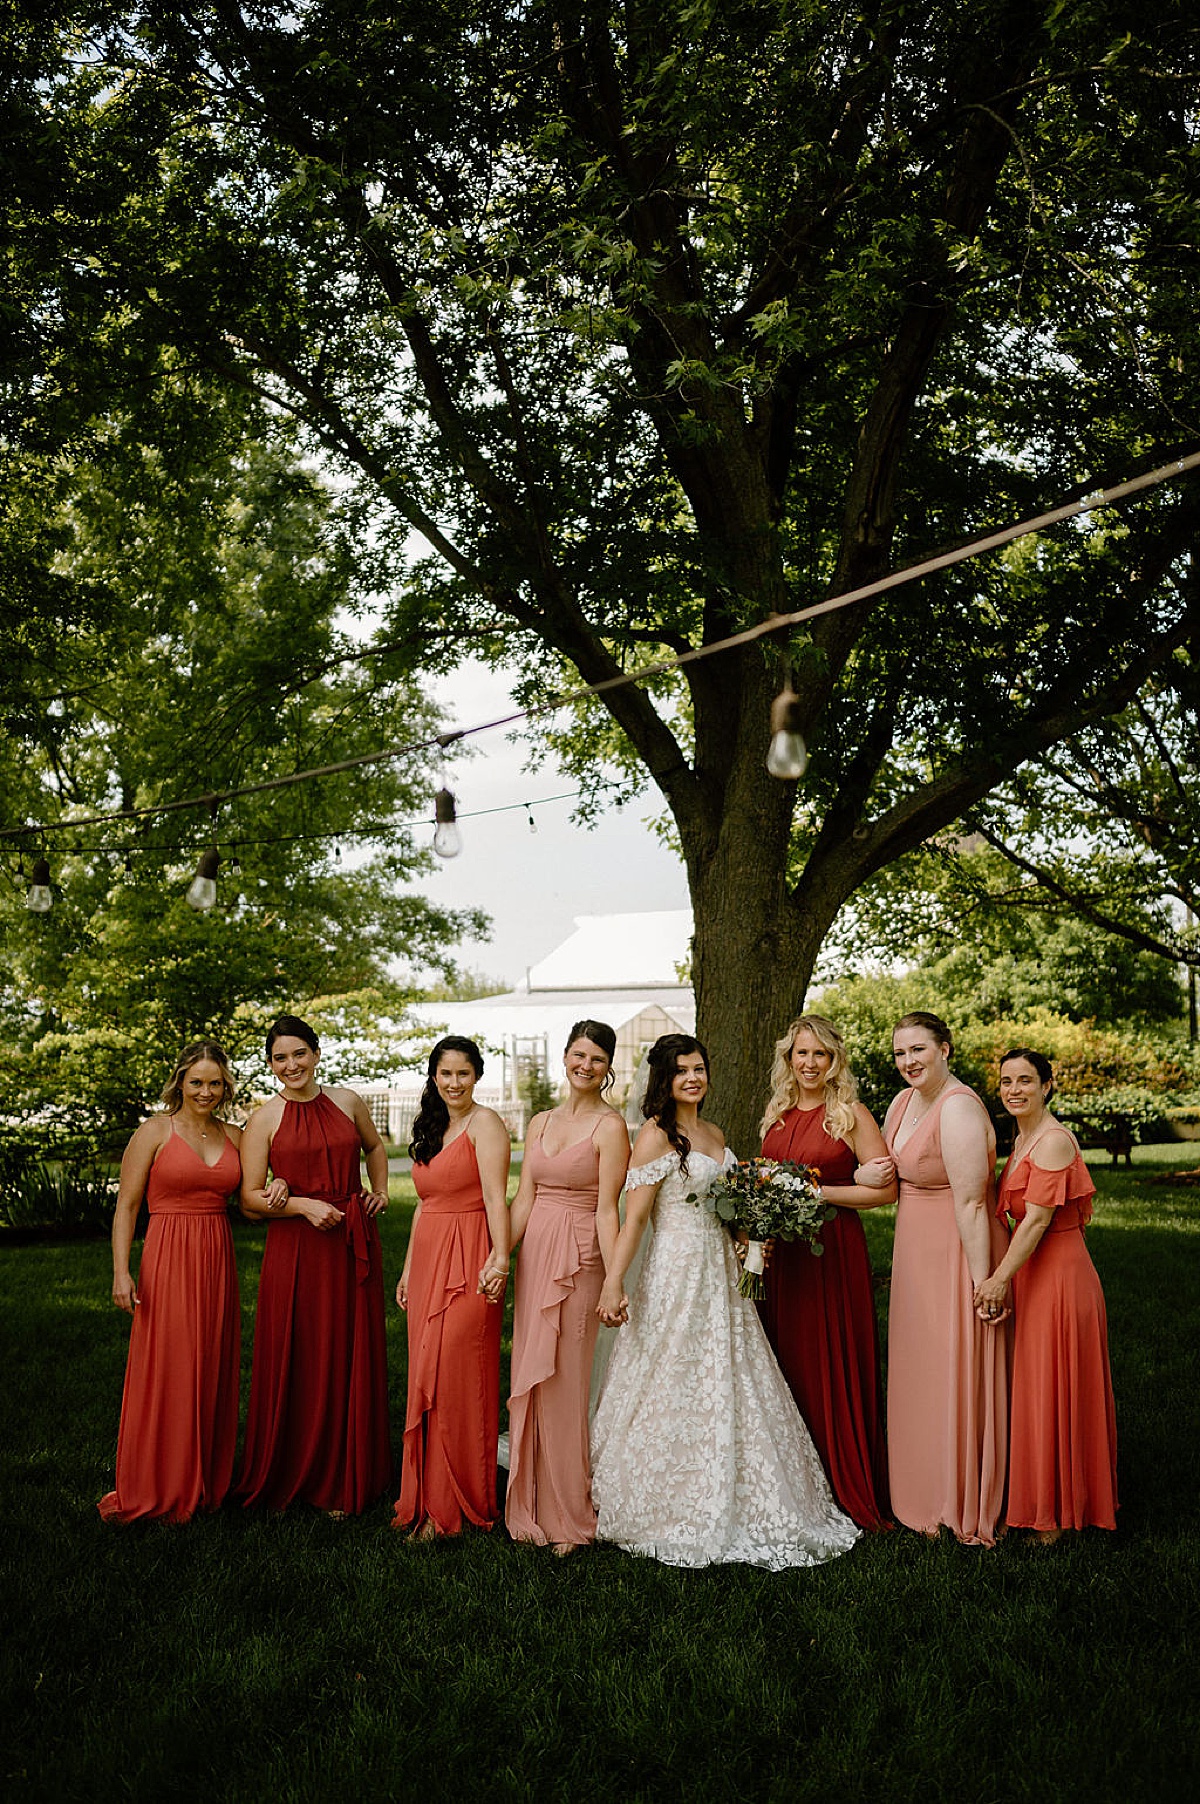 bride in boho embellished gown poses with bridesmaids before wedding shot by indigo lace collective